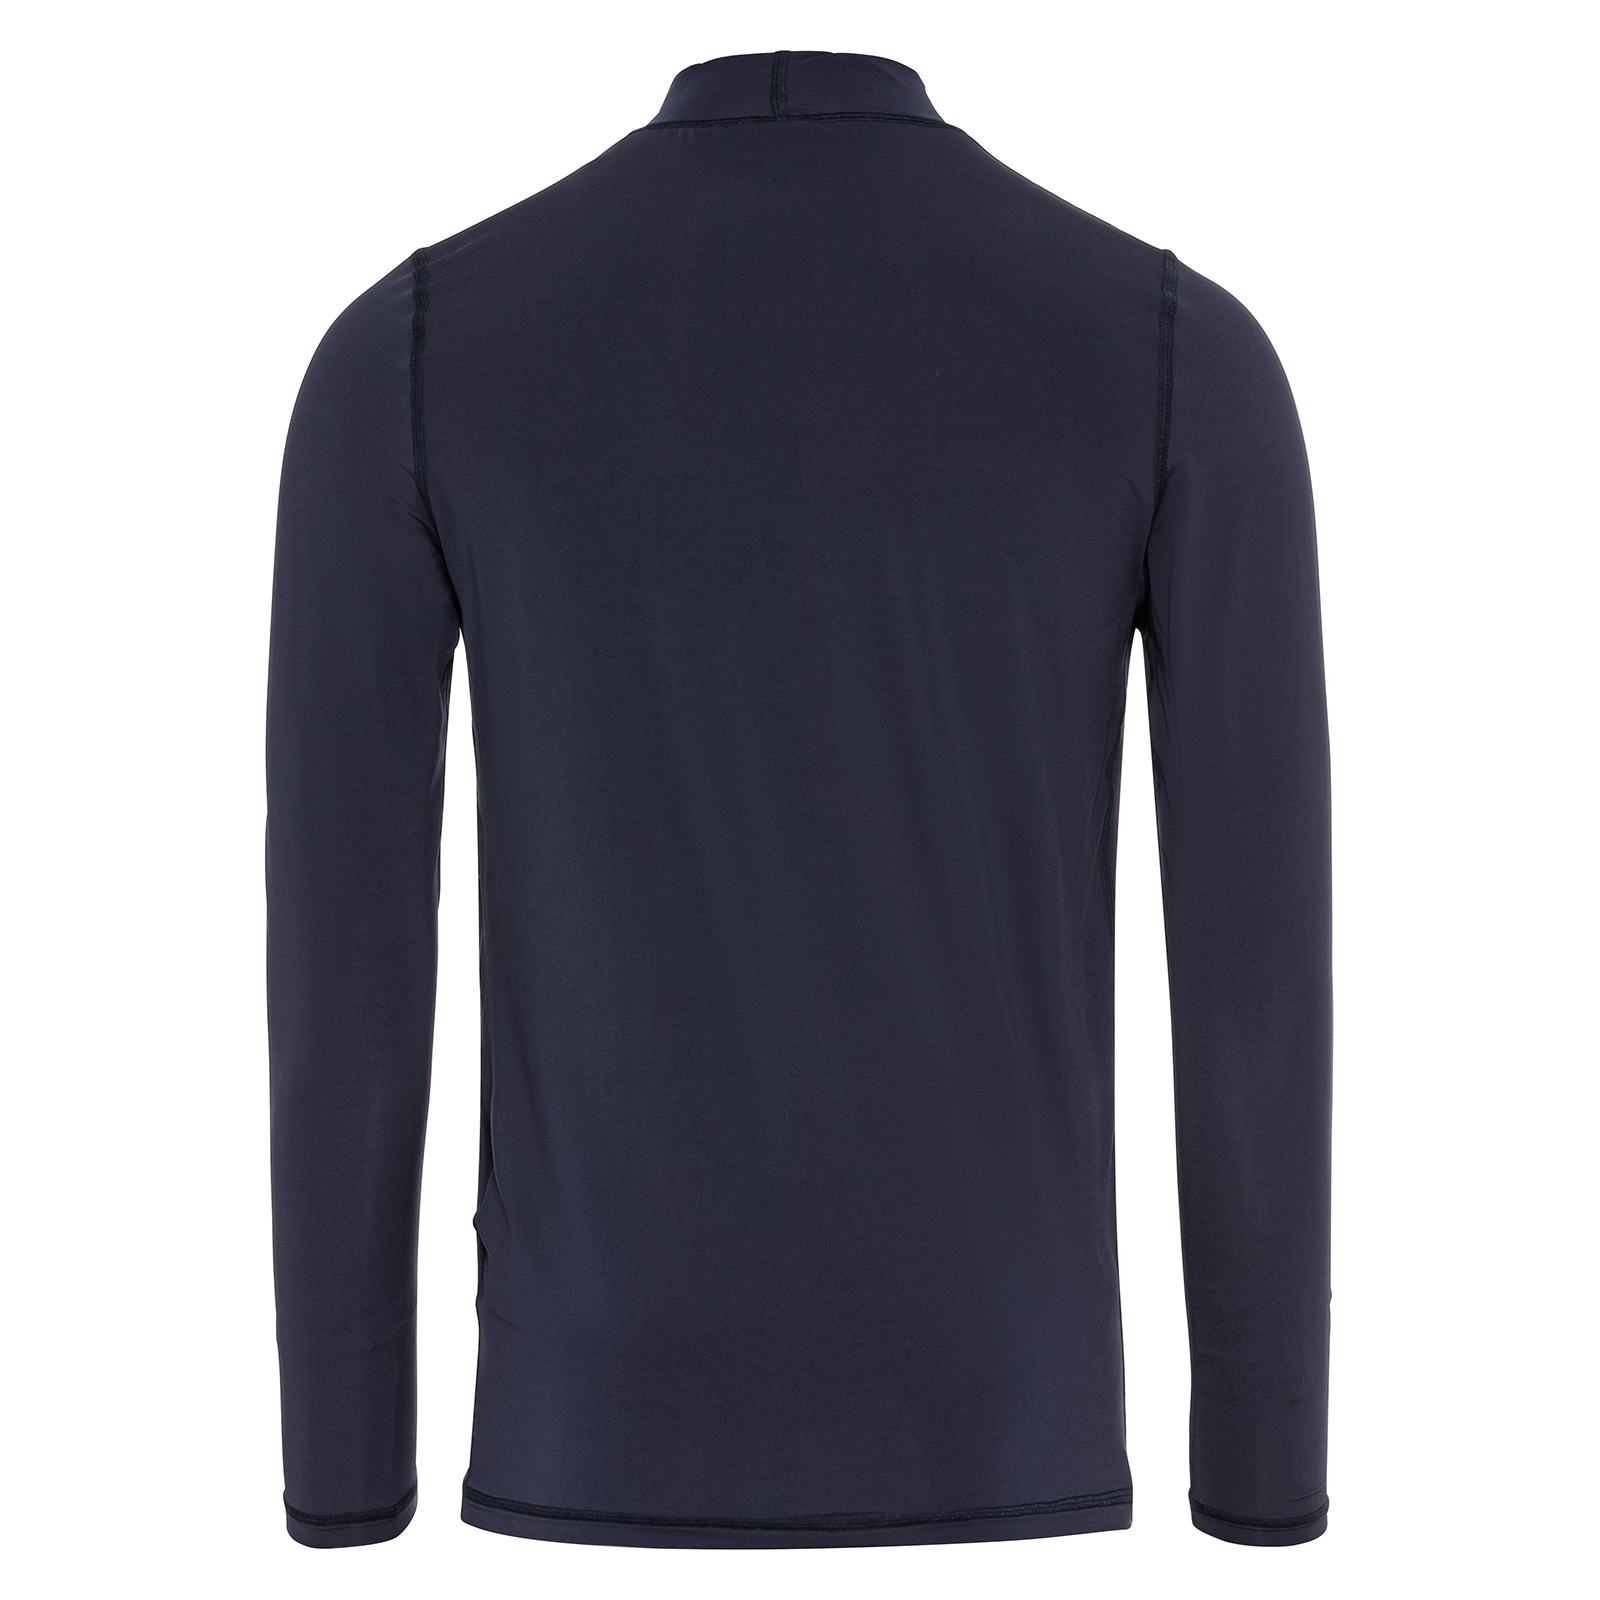 Men's long-sleeved shirt with ultraviolet protection factor